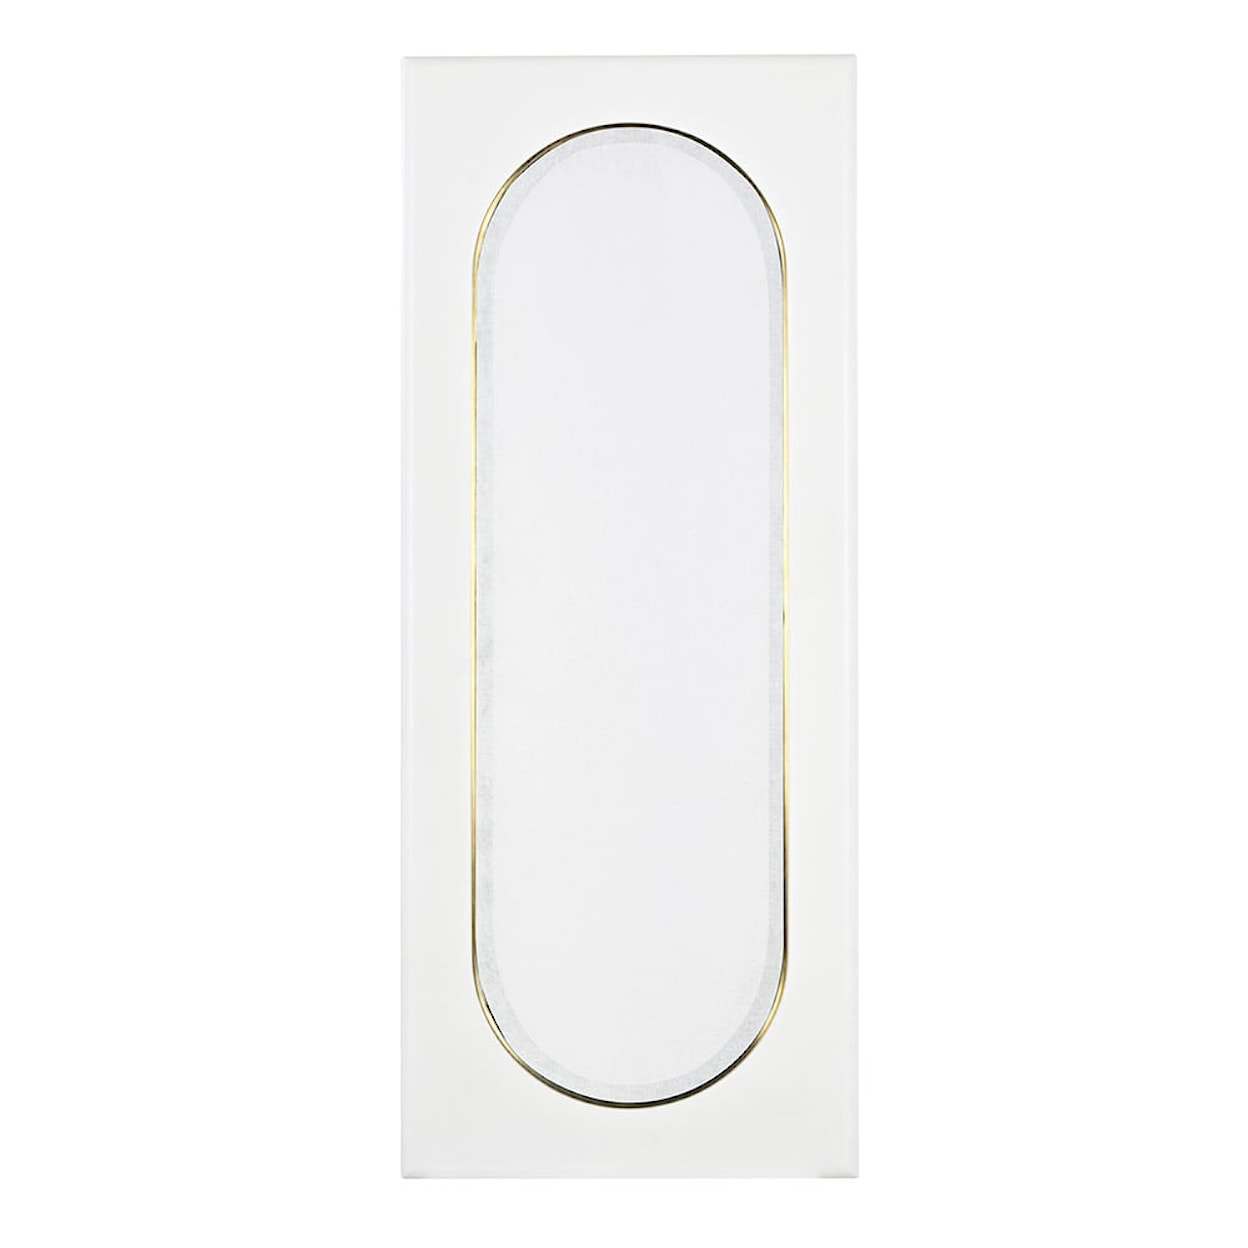 Oliver Home Furnishings Mirrors The Portal Mirror Large